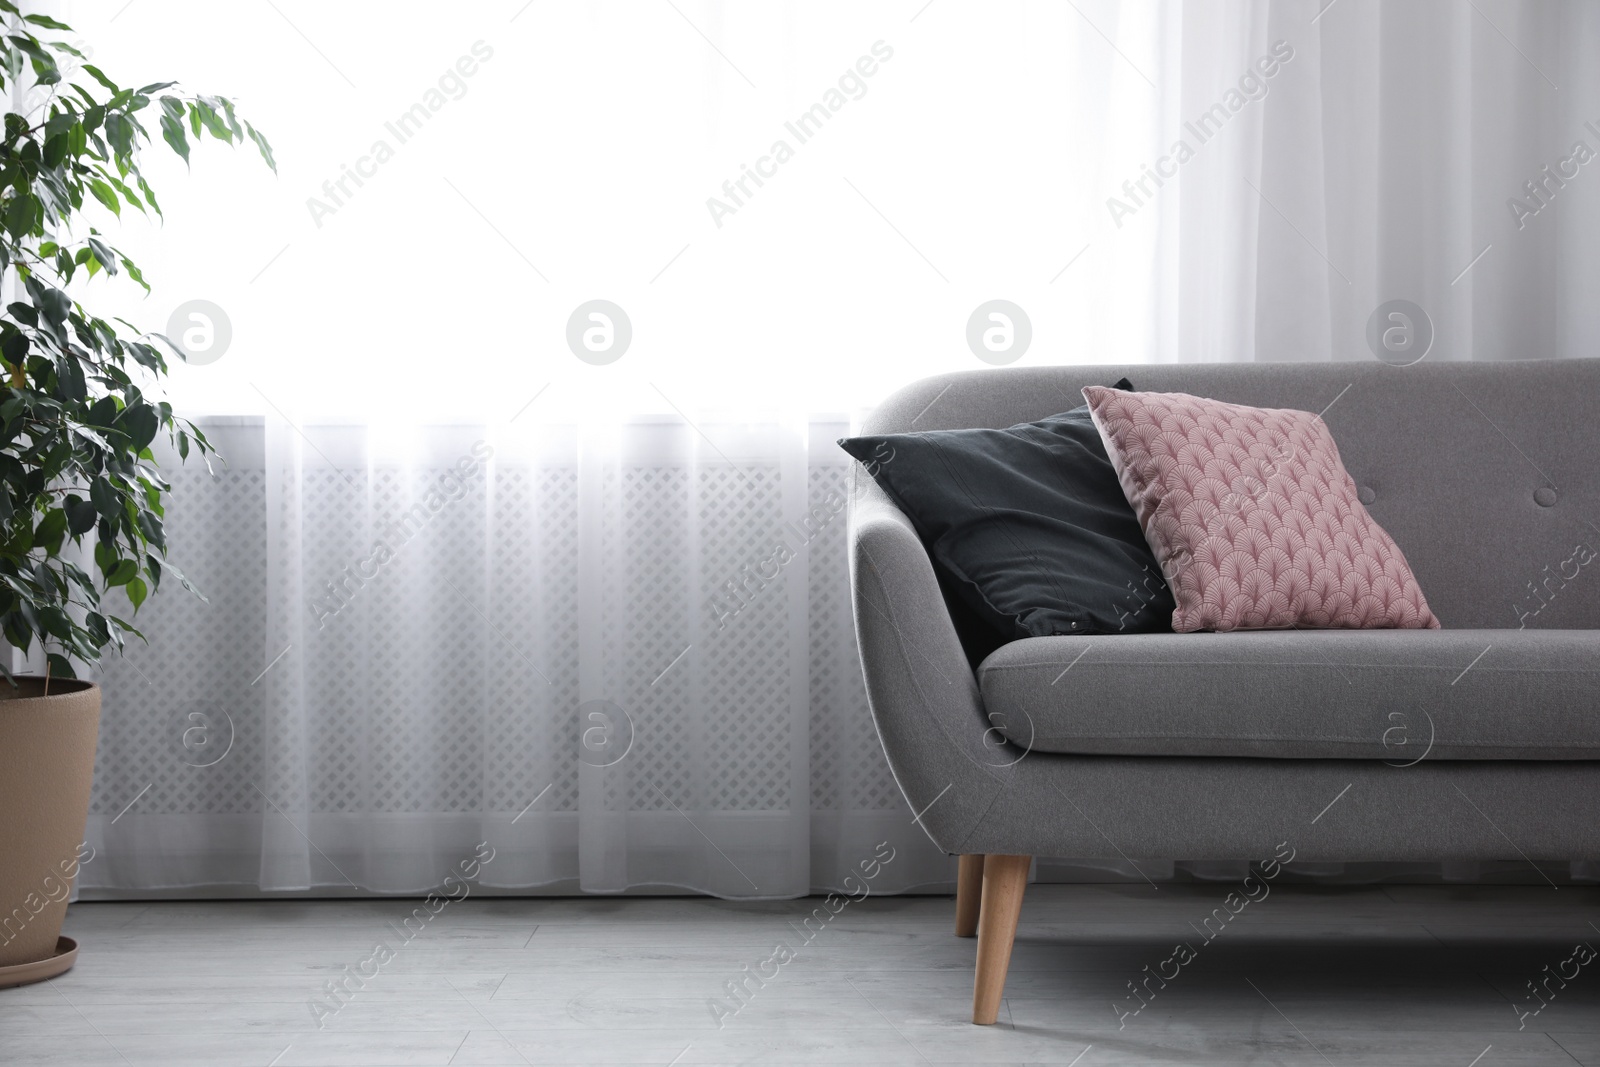 Photo of Soft pillows on modern sofa in living room